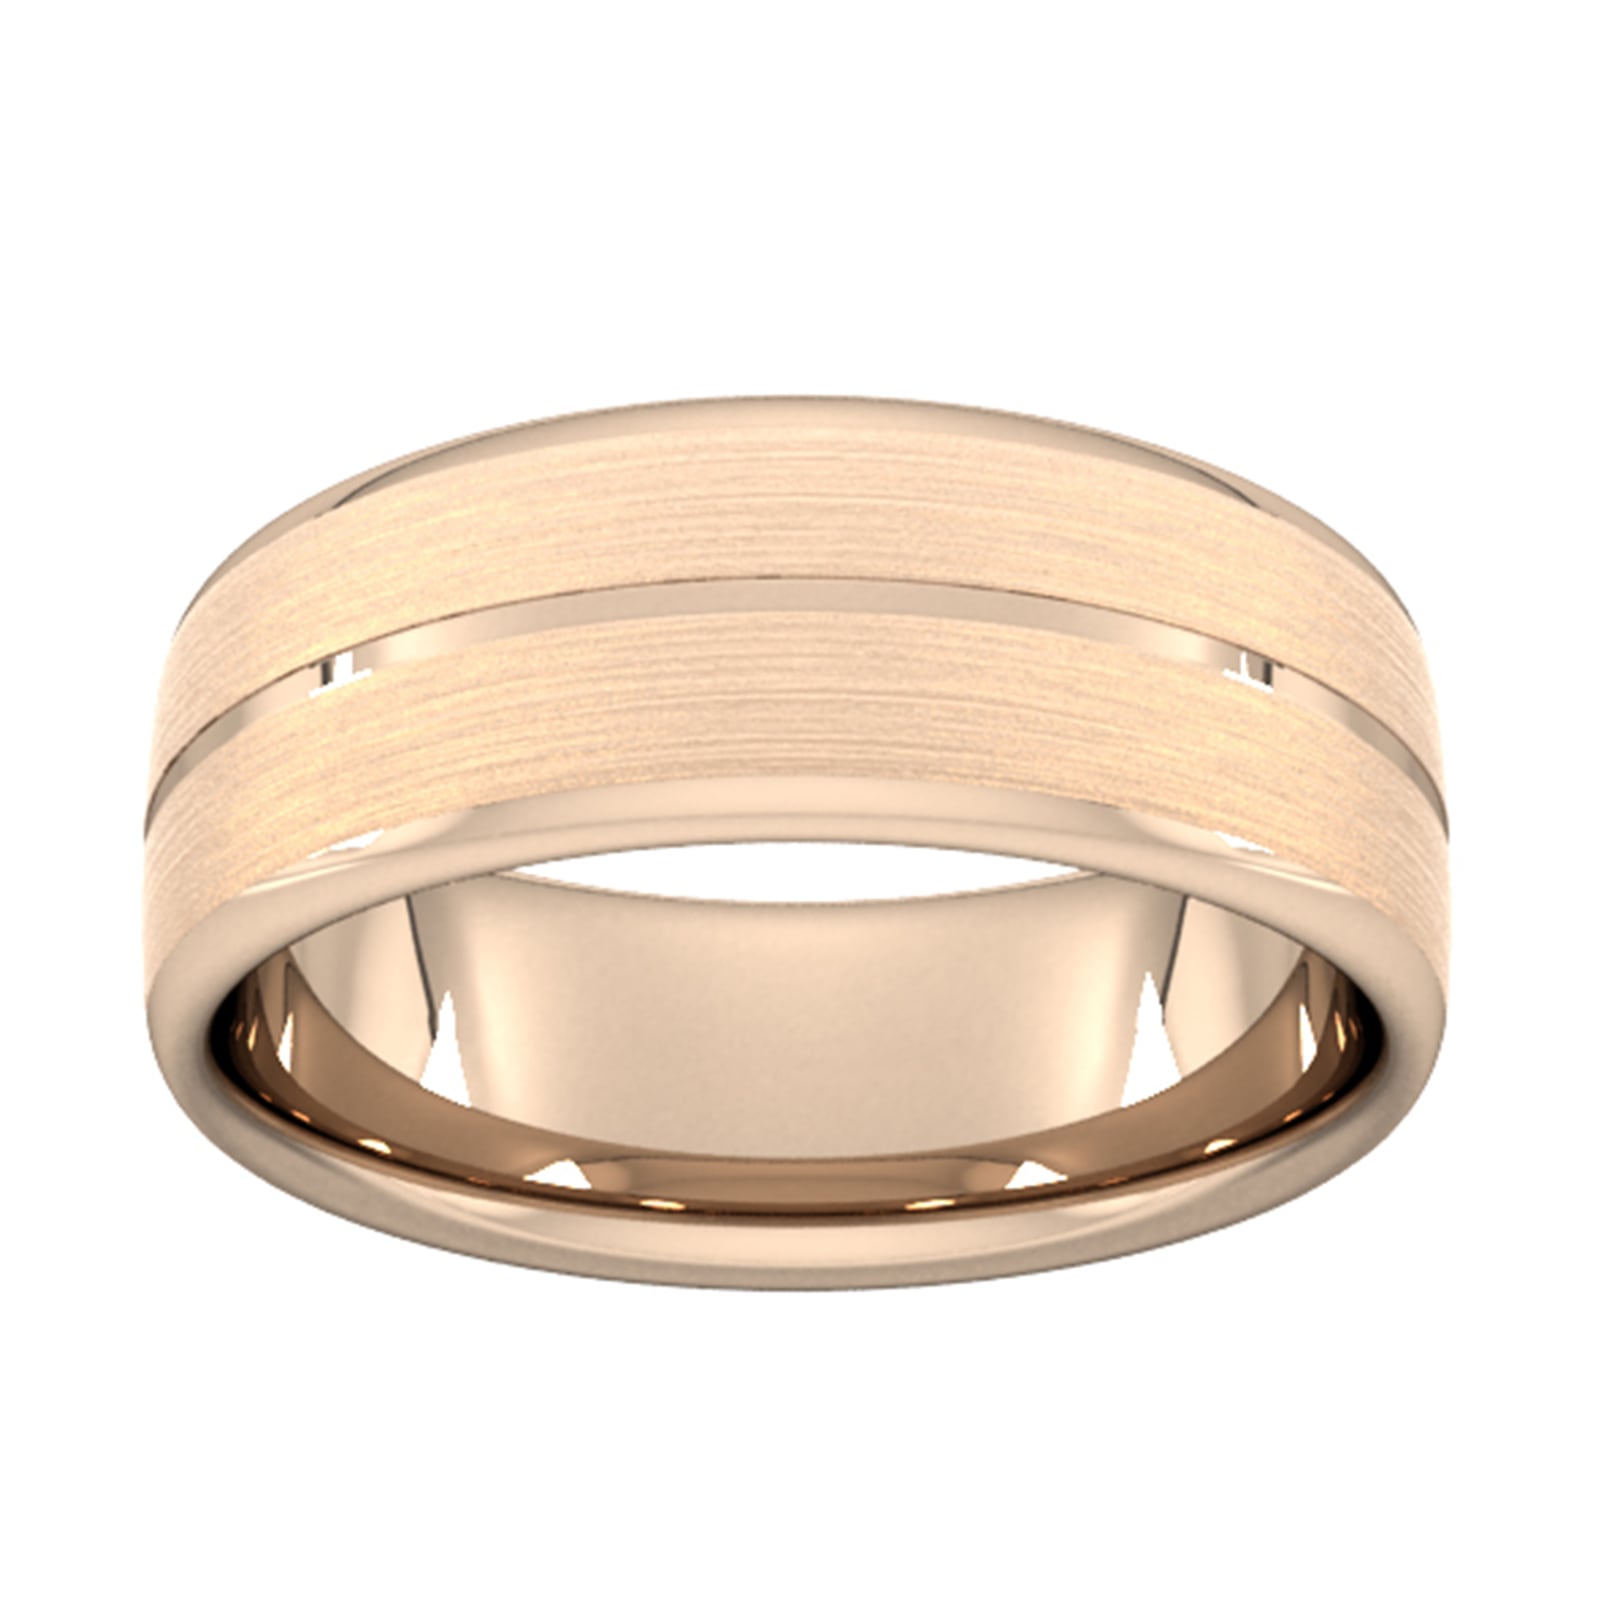 8mm Flat Court Heavy Centre Groove With Chamfered Edge Wedding Ring In 9 Carat Rose Gold - Ring Size I